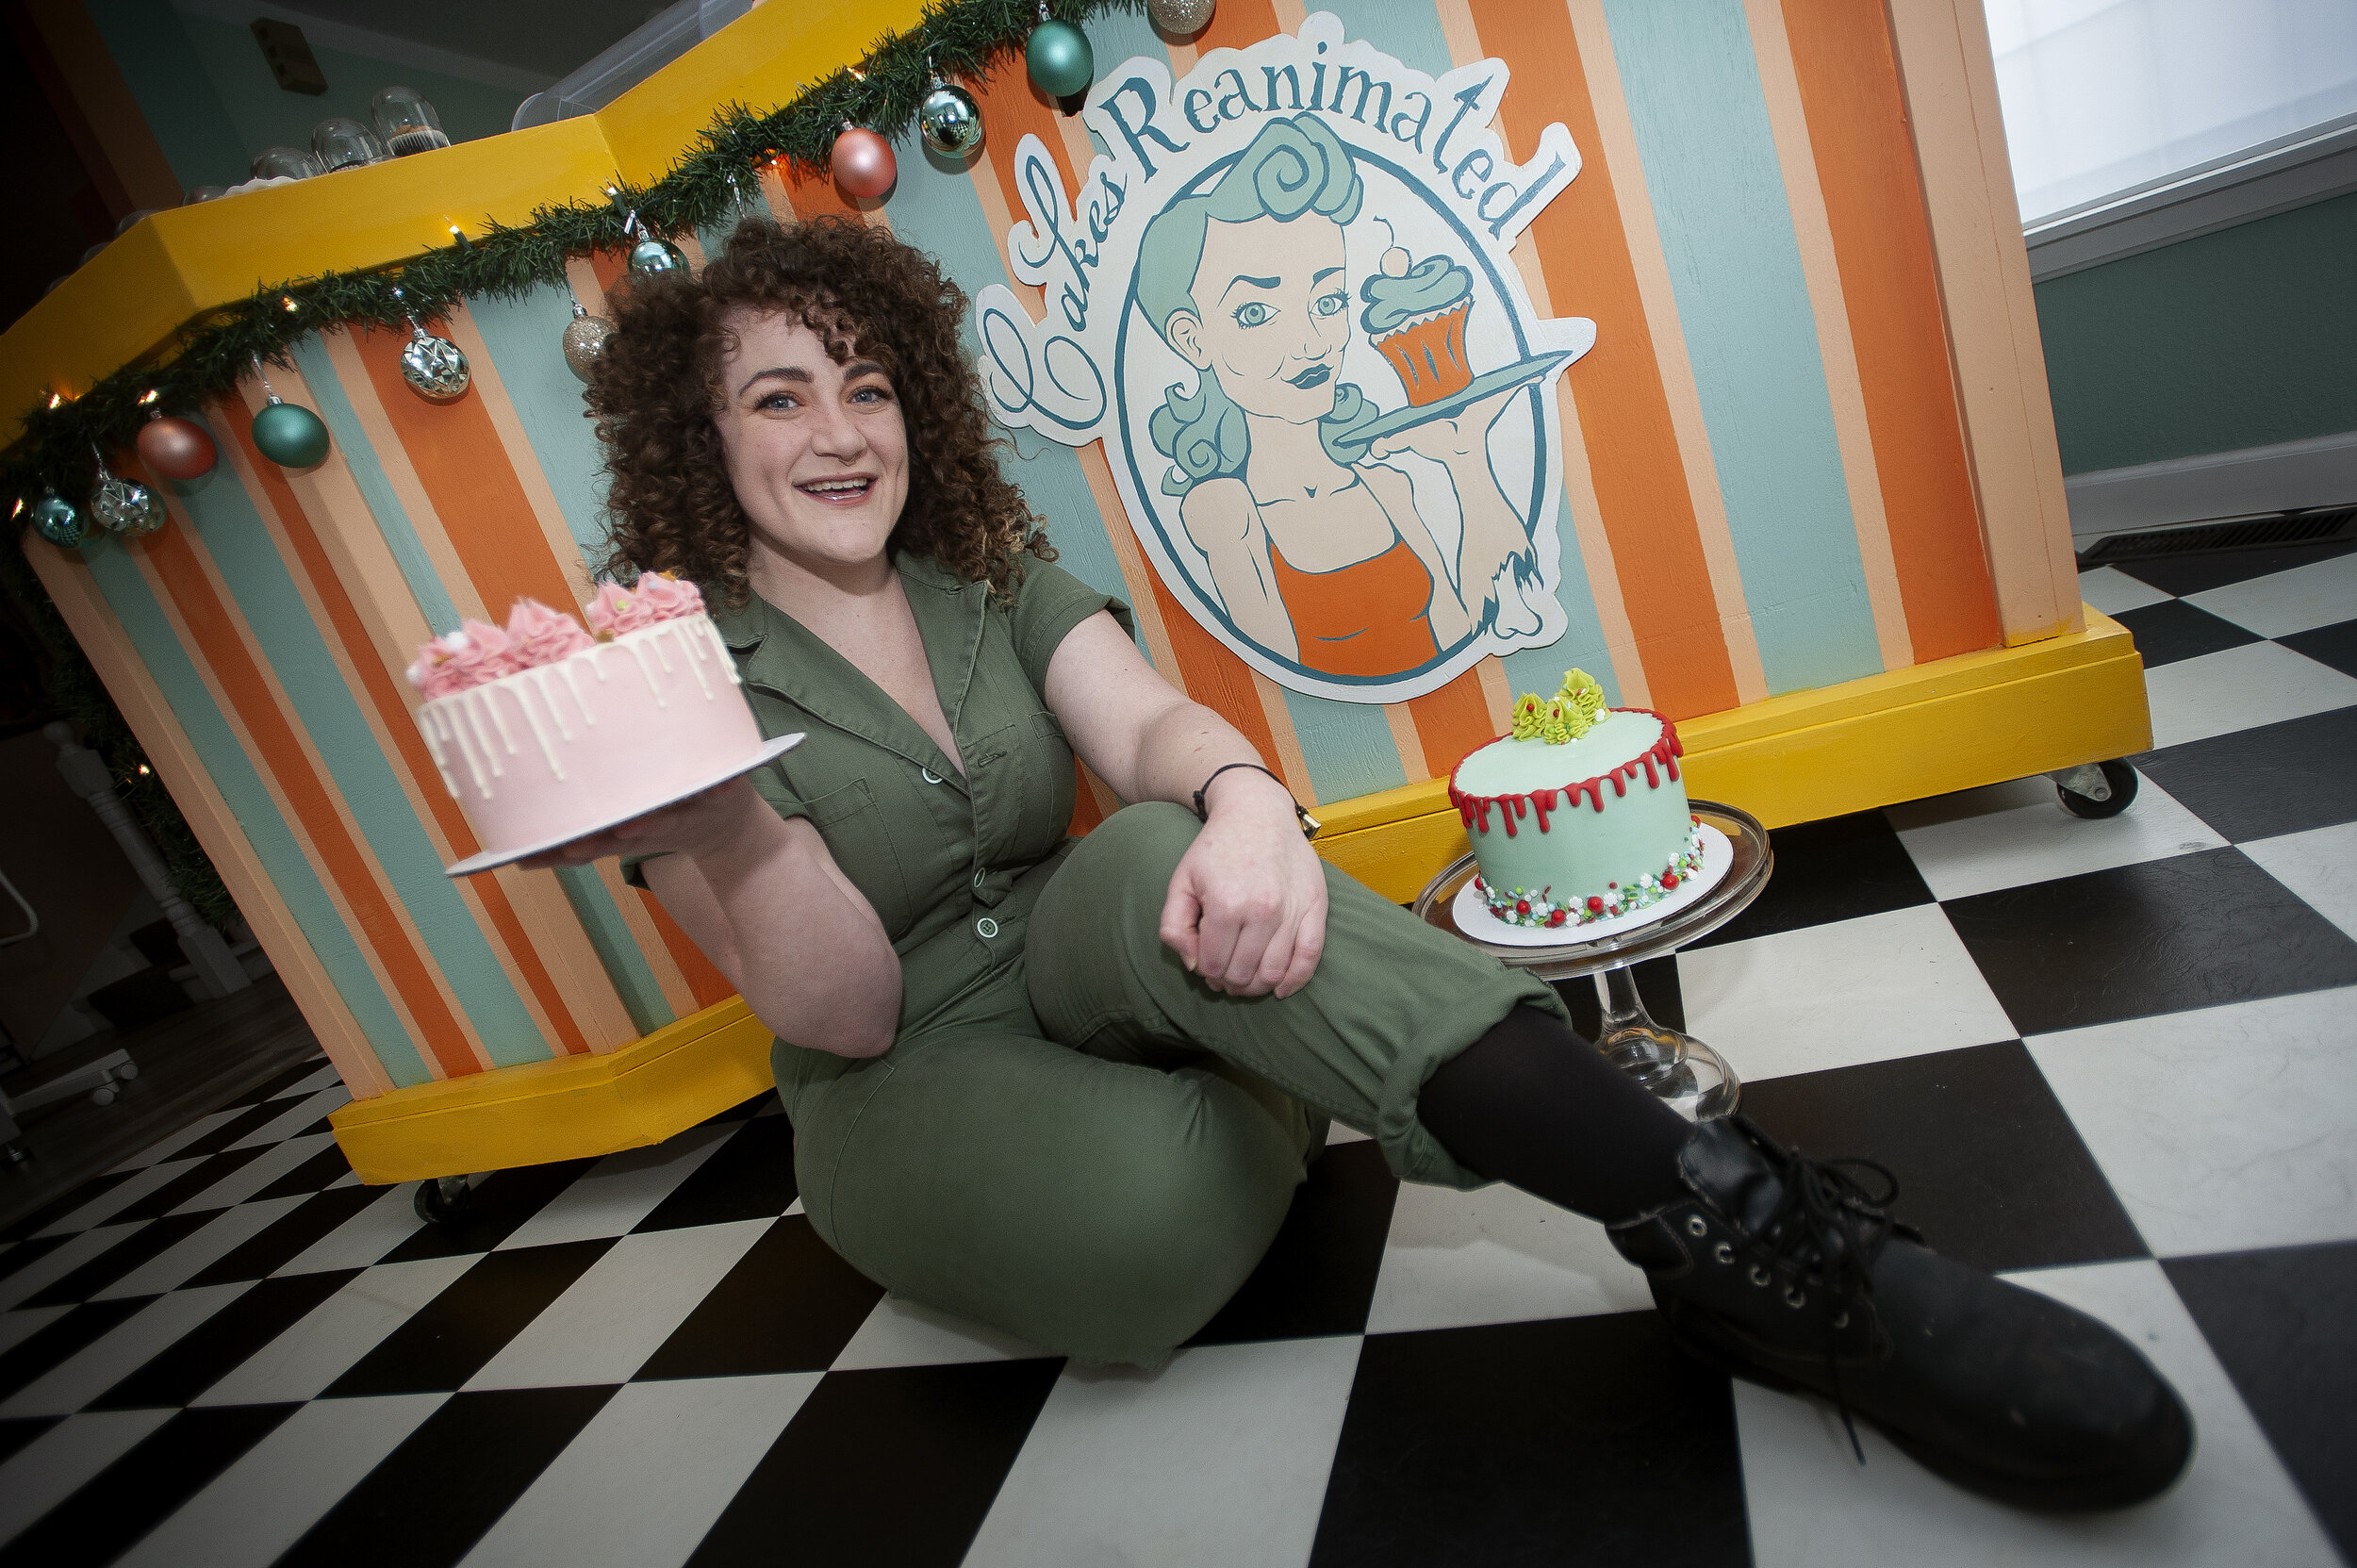  Cakes Reanimated owner Becky Brown, originally of Jackson and now Cape Girardeau, poses for a portrait Wednesday, Dec. 18, 2019, at Cakes Reanimated at 720 Themis St. in Cape Girardeau.  